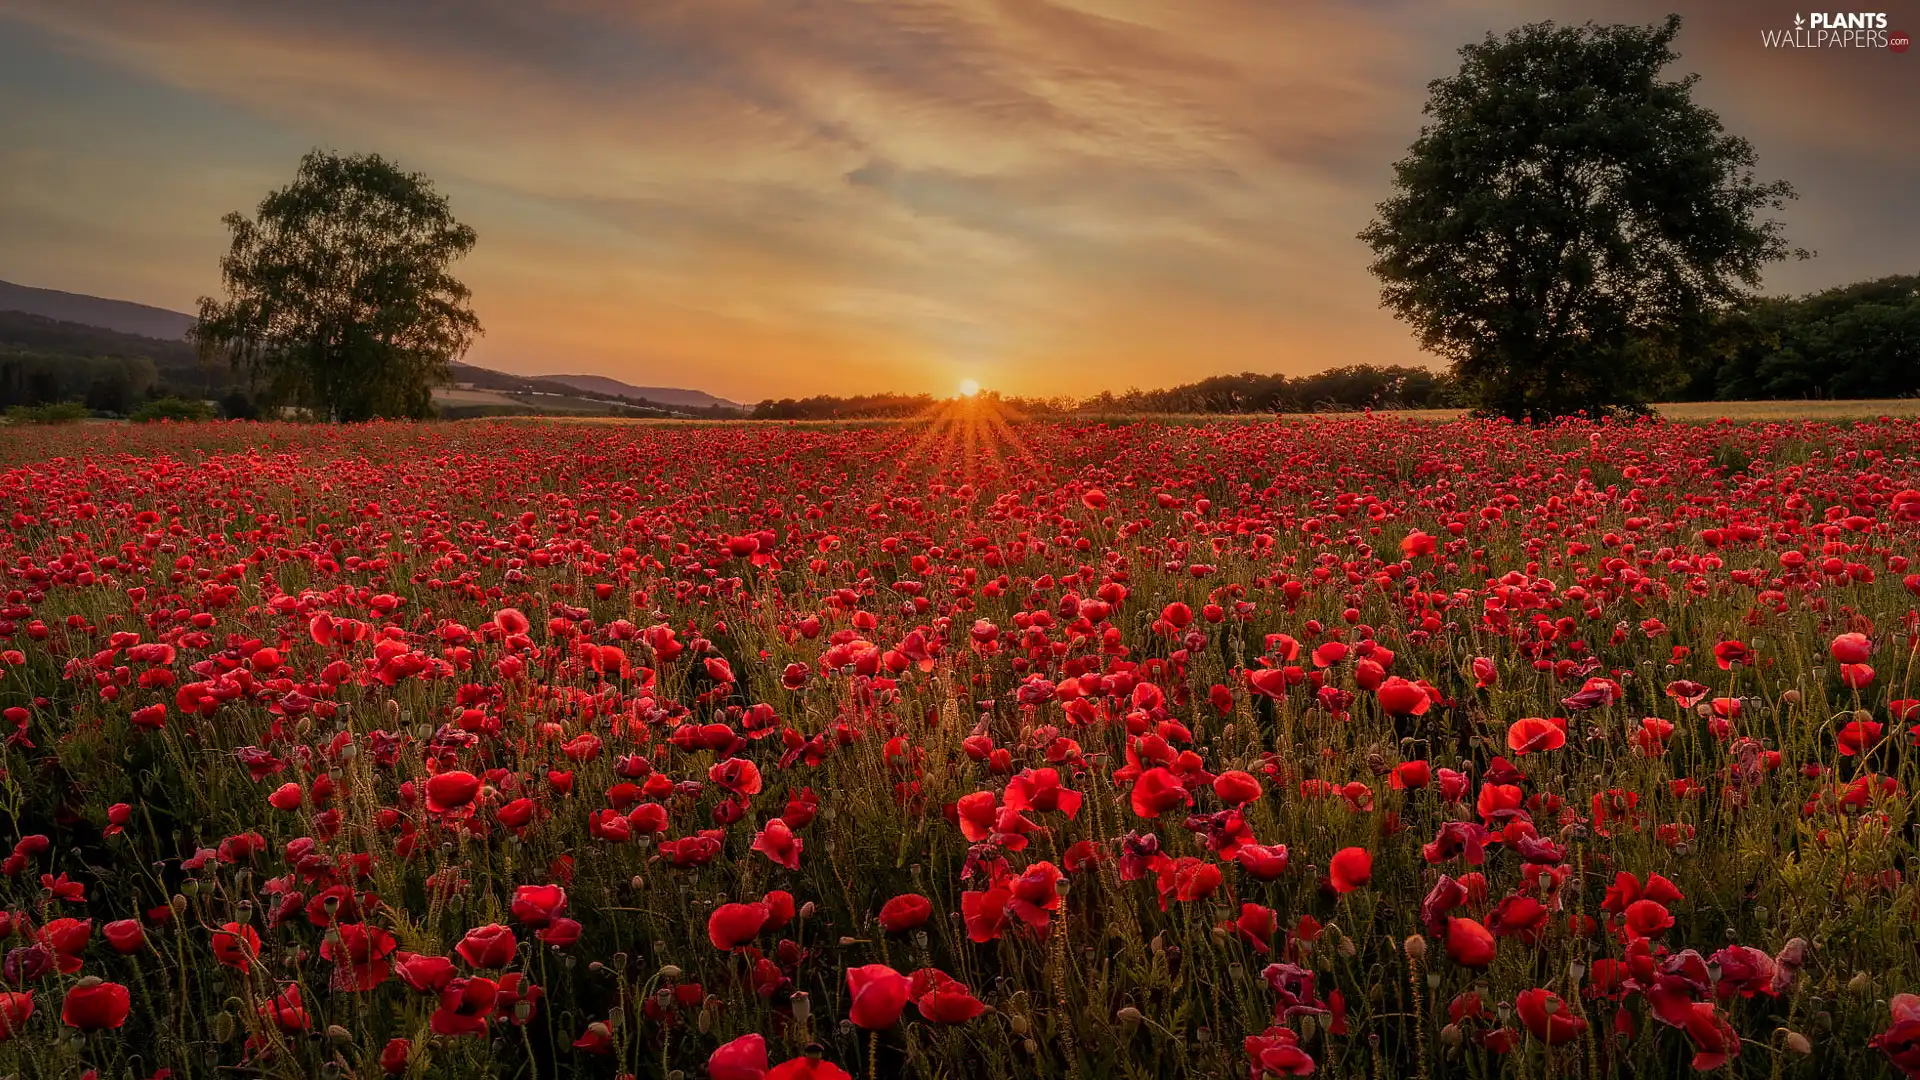 trees, papavers, Great Sunsets, Meadow, Field, viewes, rays